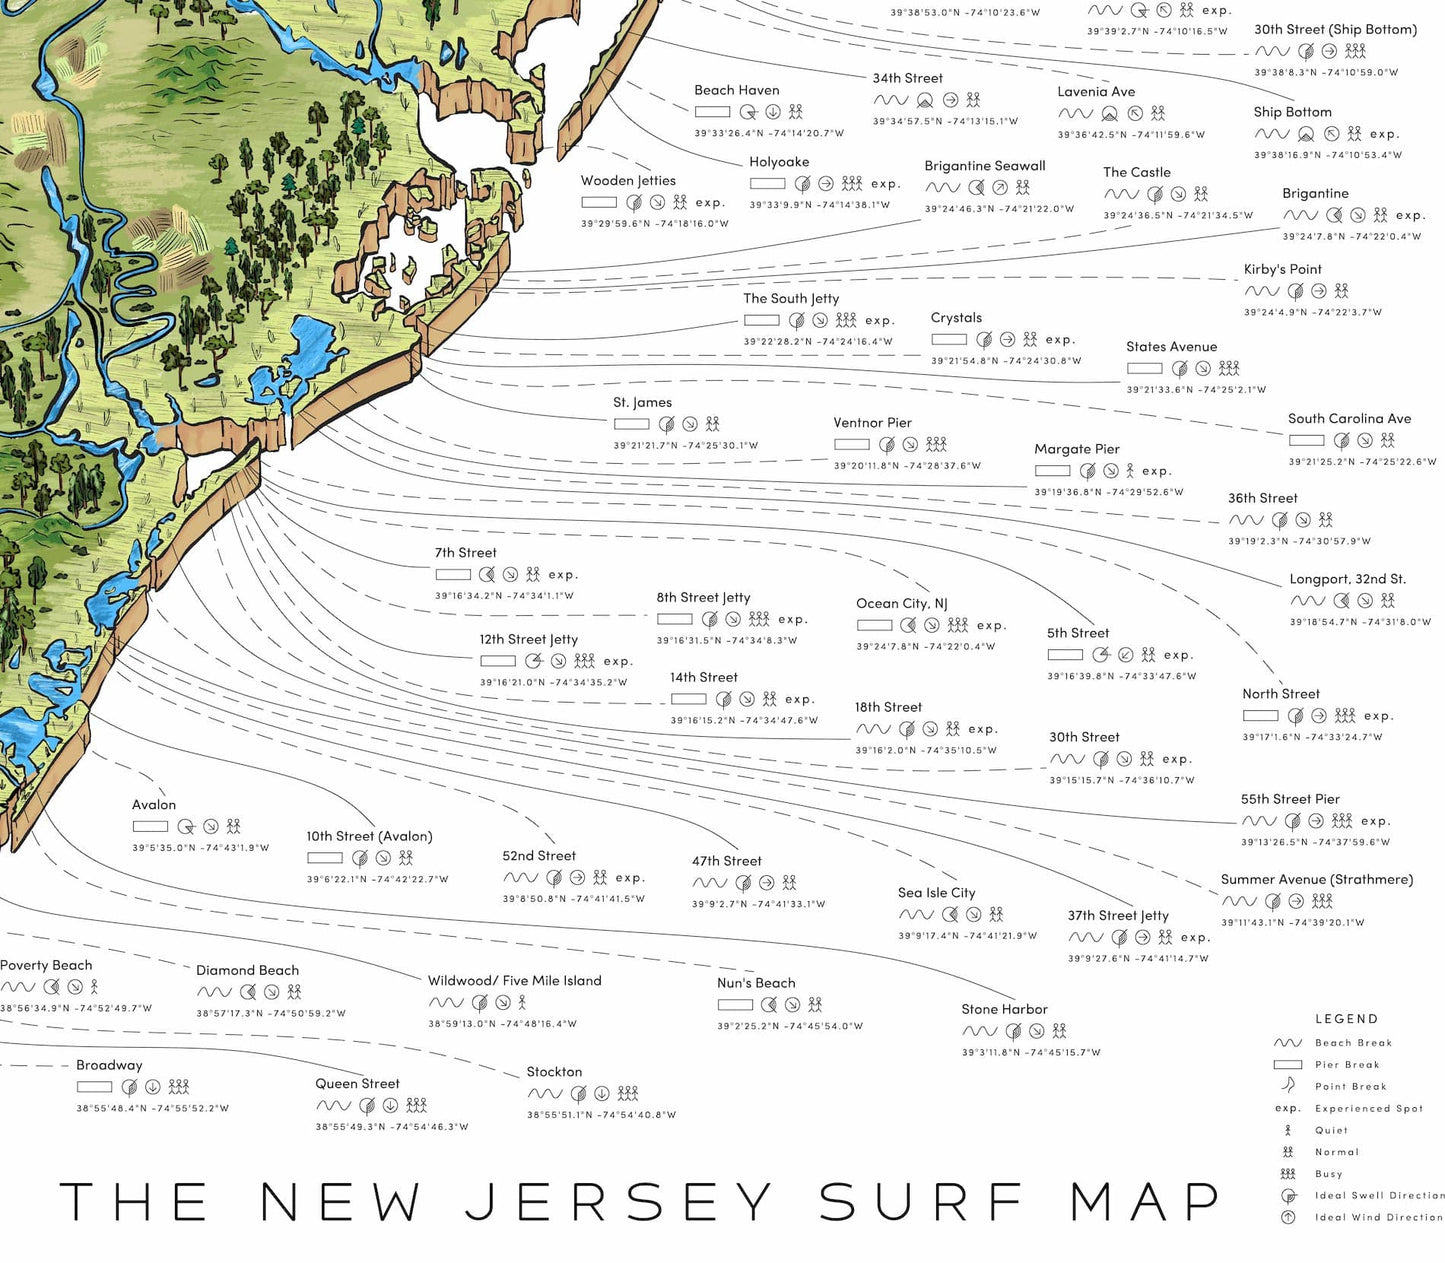 The New Jersey Surf Map